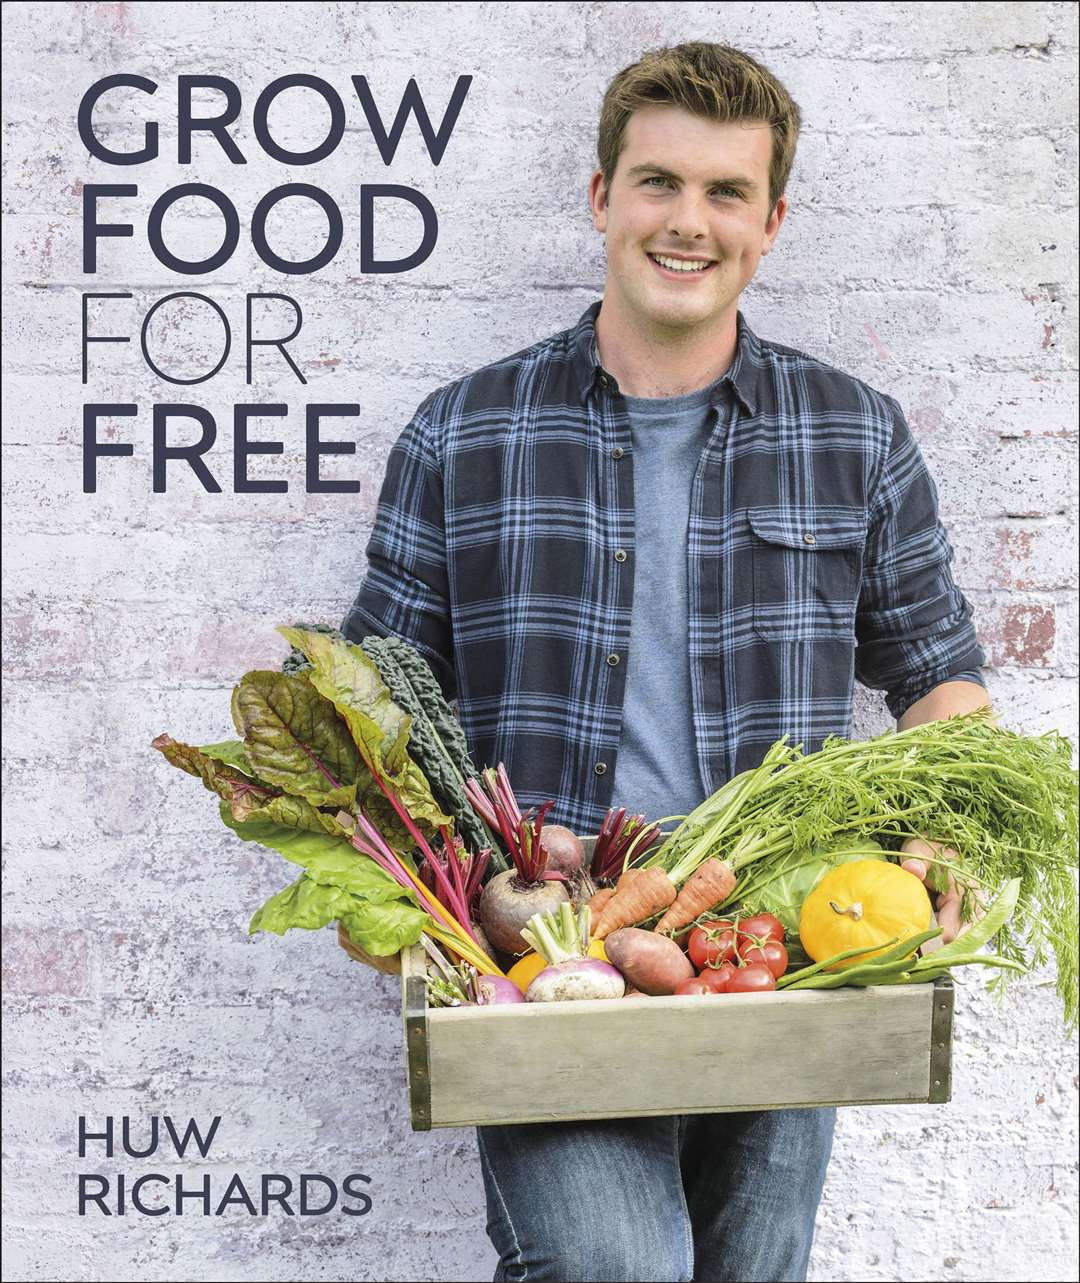 Grow Food For Free by Huw Richards. Picture: Dorling Kindersley/PA